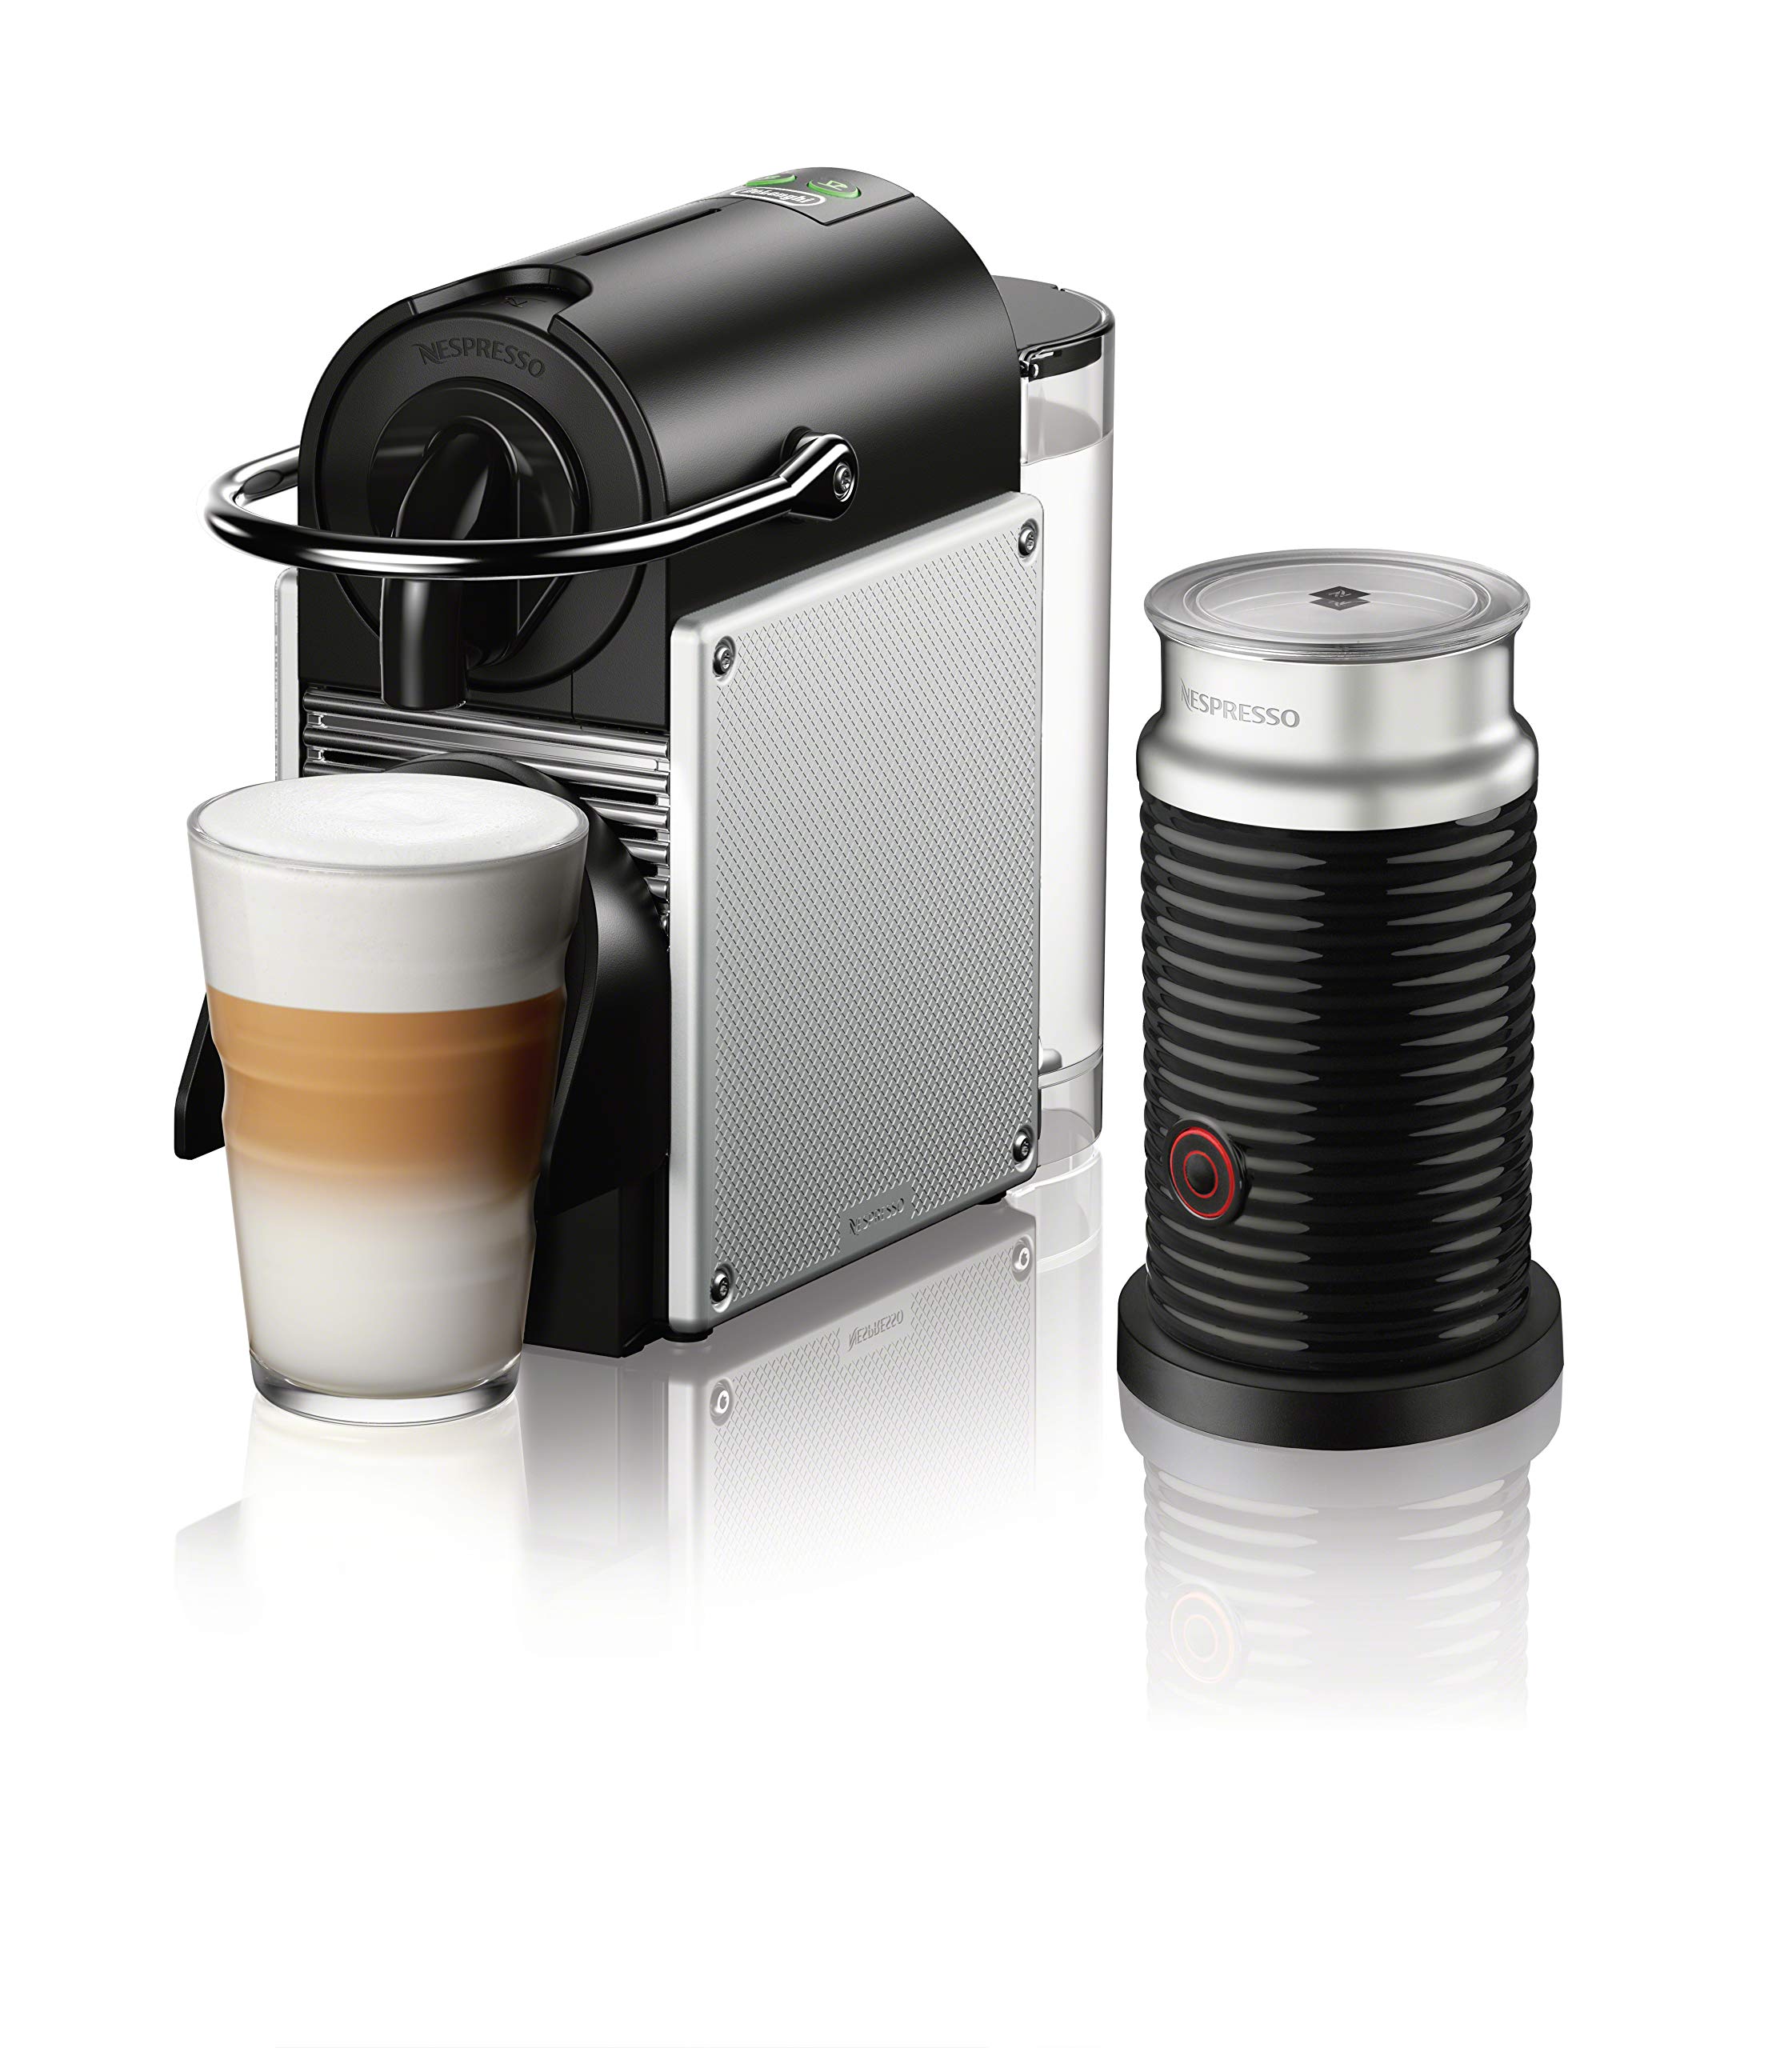 Nespresso by De'Longhi Pixie Single-Serve Espresso Machine with Simplified Water Tank in Aluminum and Aeroccino Milk Frother in Black - image 1 of 4